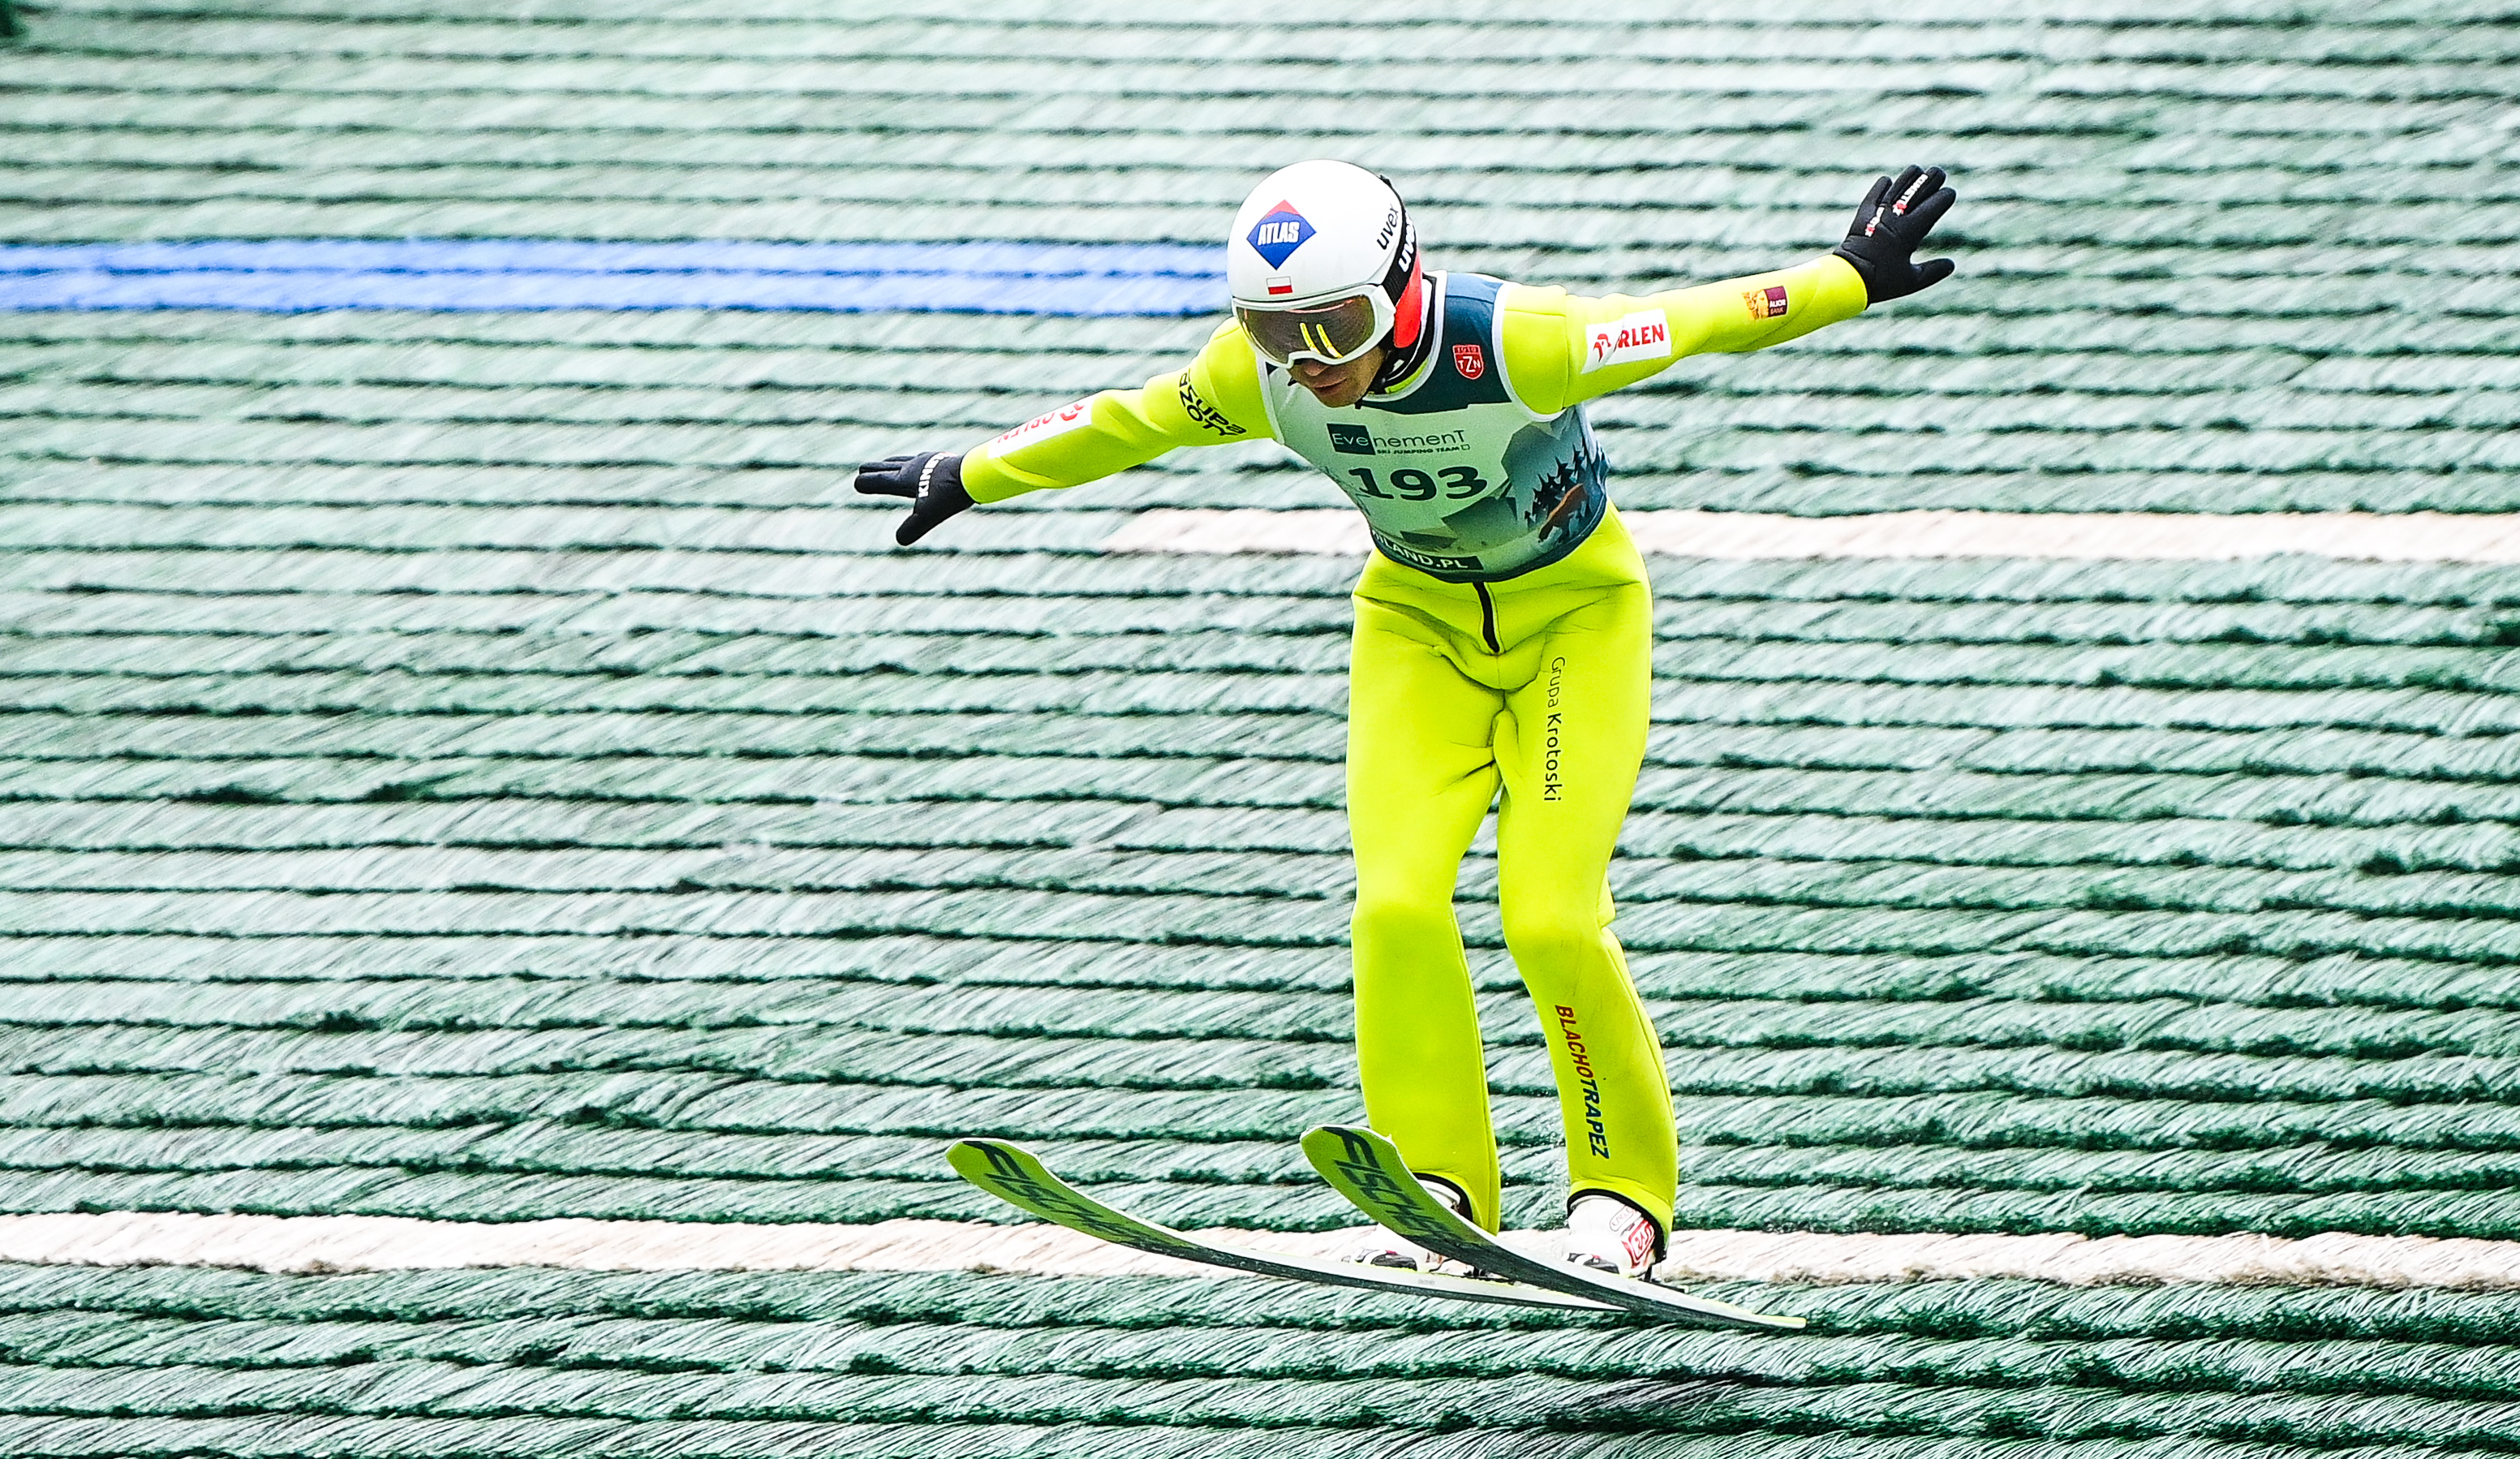 Ski jumper’s debut at the European Games in just four days